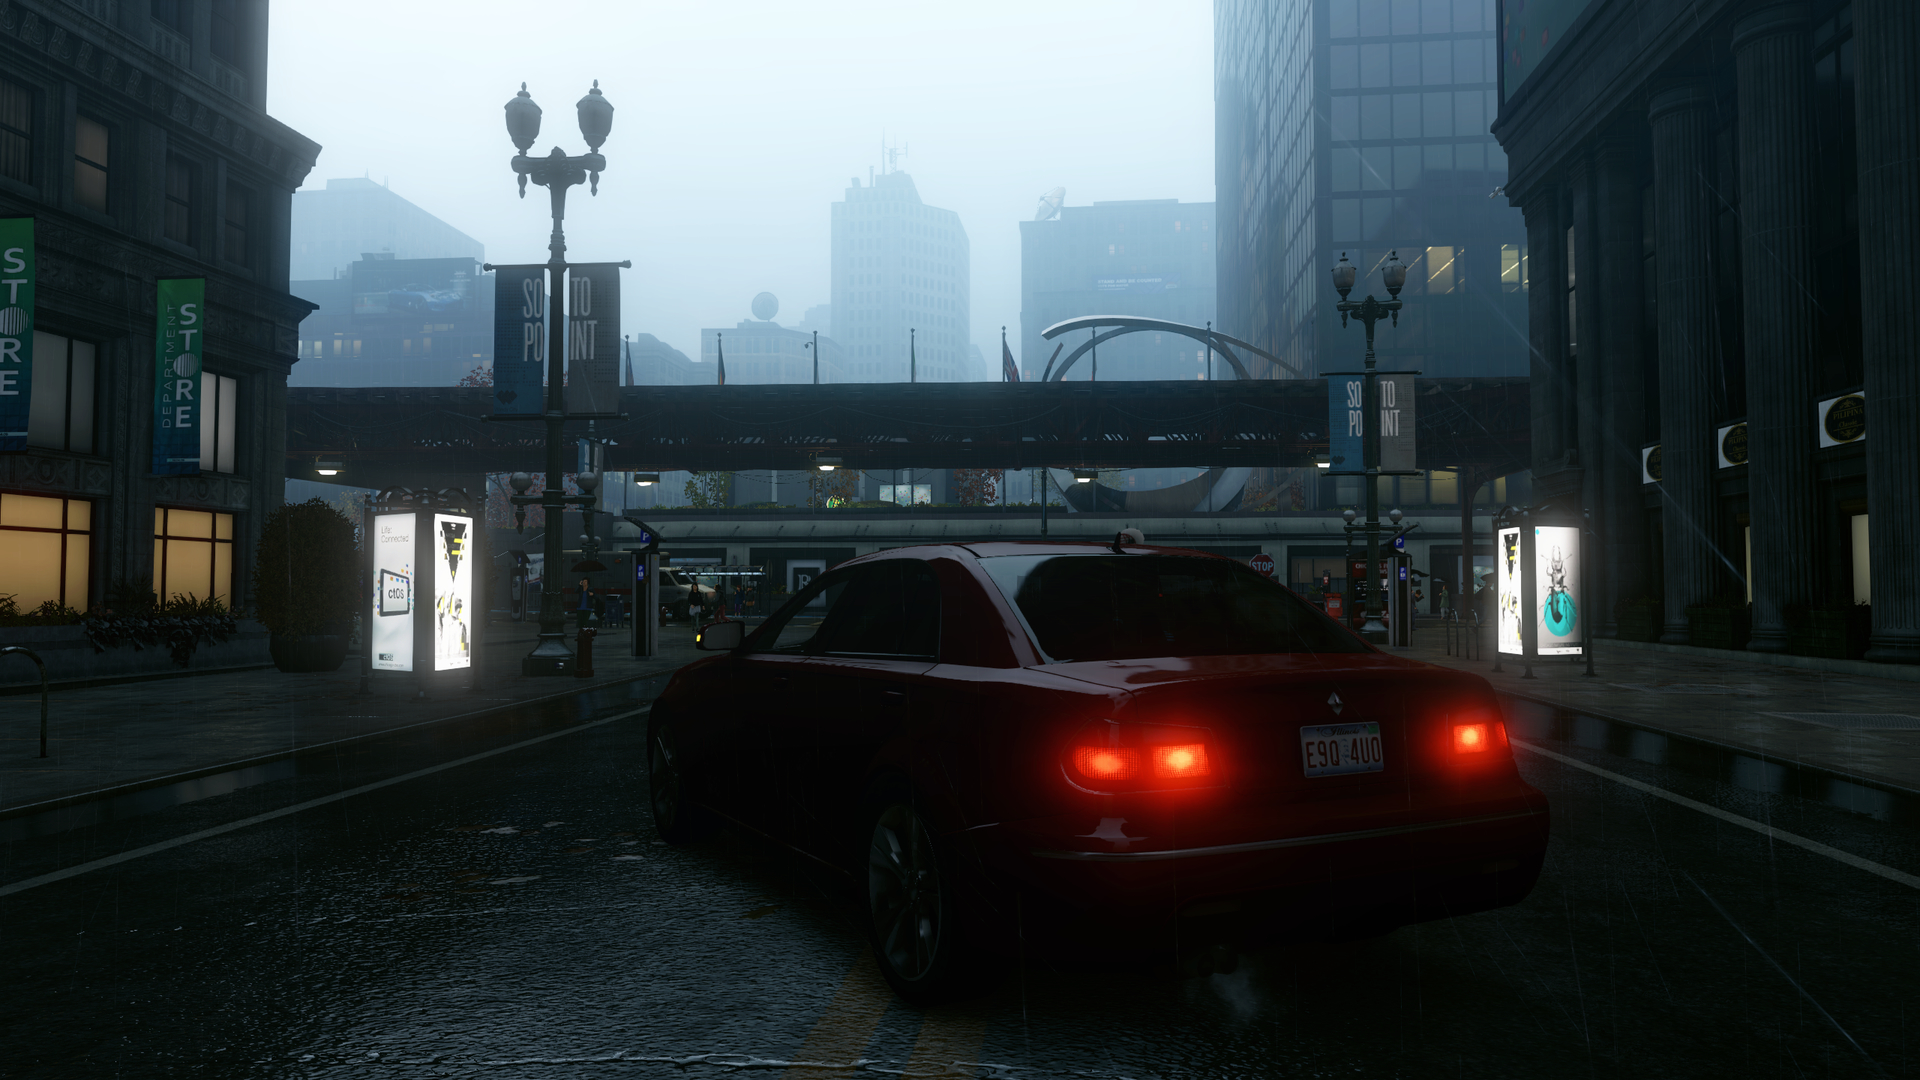 watch_dogs_exe_dx11_20140531_005814_1080p_by_confidence_man-d7keopt.jpg